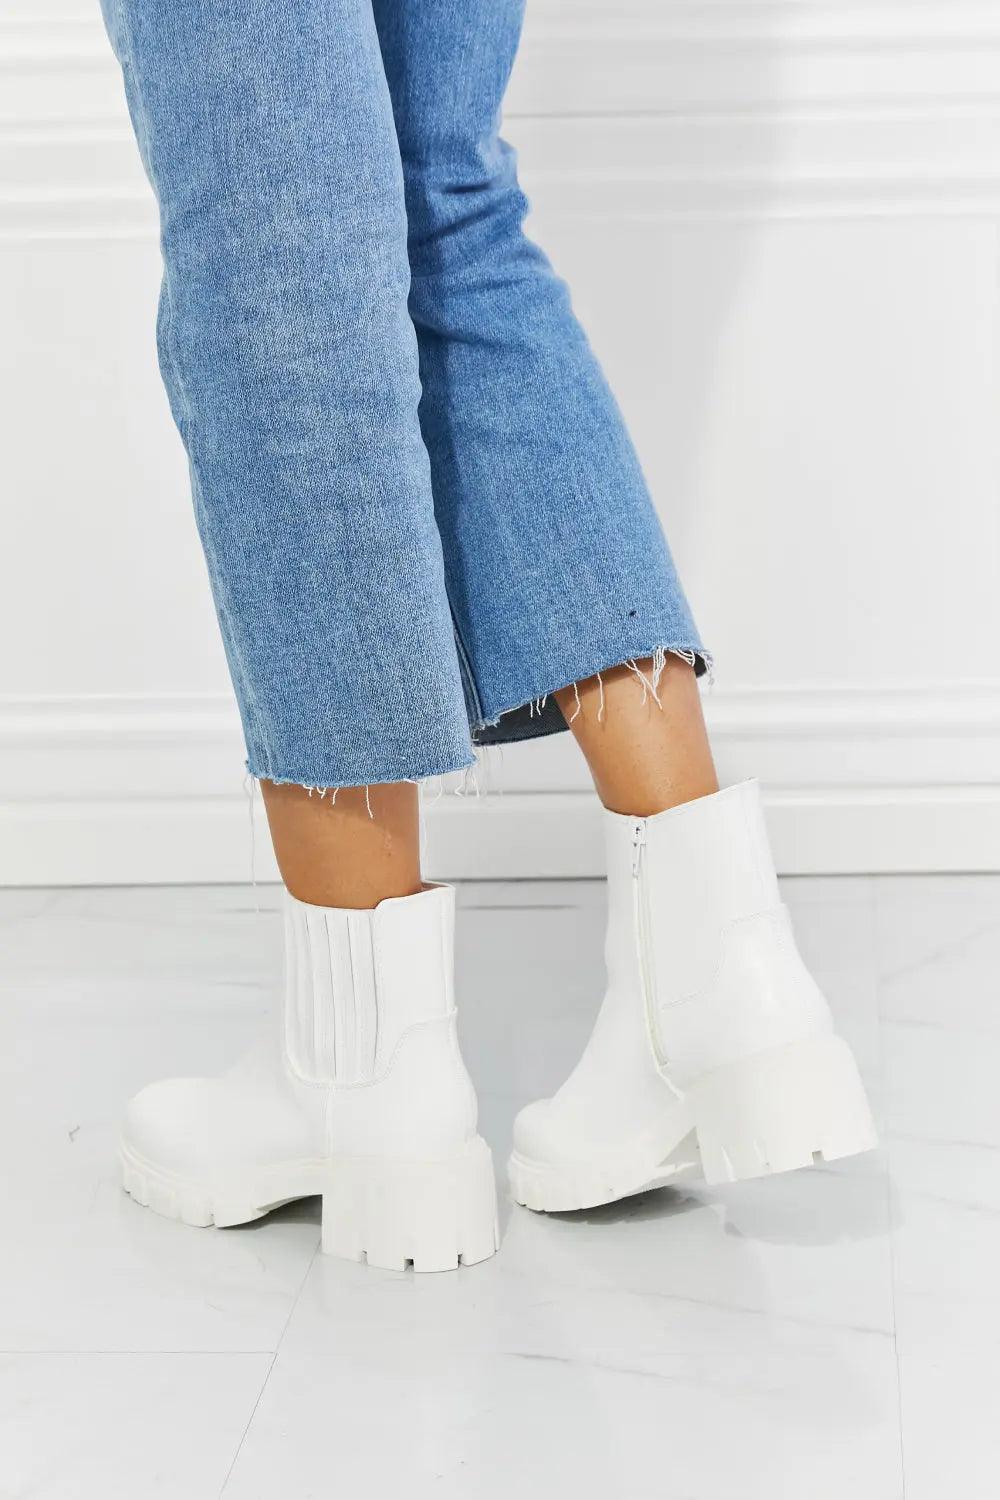 MMShoes What It Takes Lug Sole Chelsea Boots in White - Elena Rae Co.